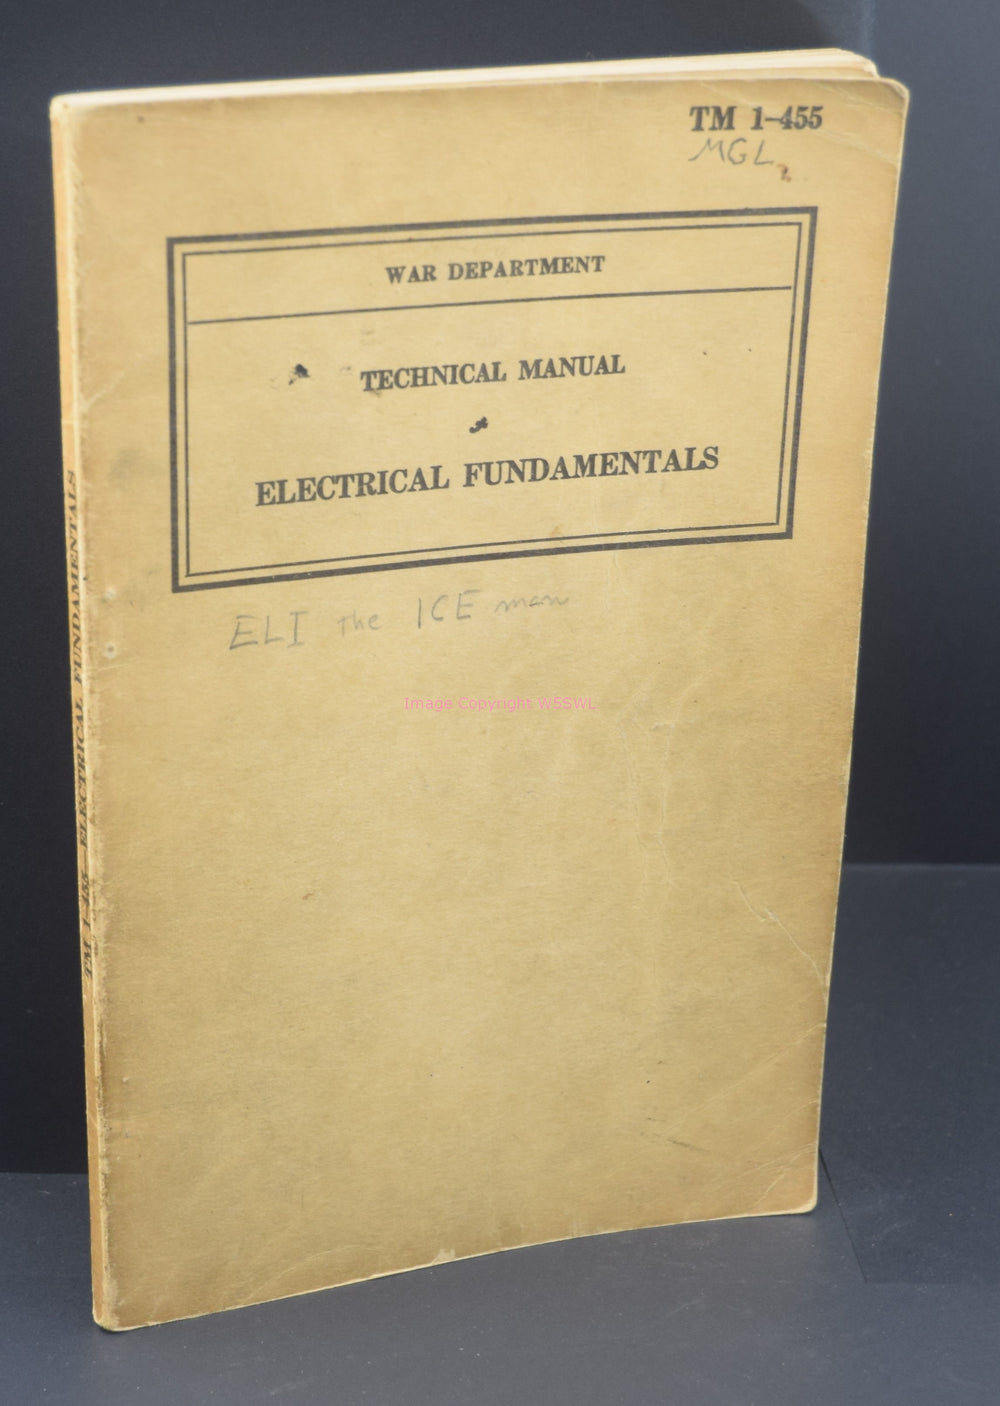 TM 1-455 1941 War Department Technical Manual Electrical Fundamentals - Dave's Hobby Shop by W5SWL